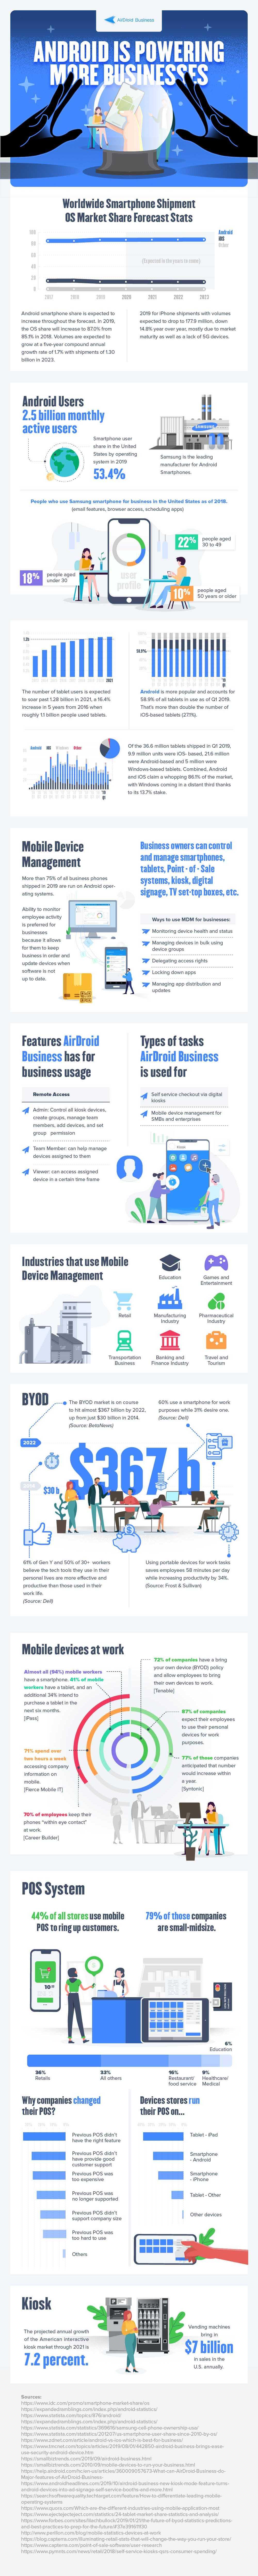 Android is Powering More Businesses #infographic